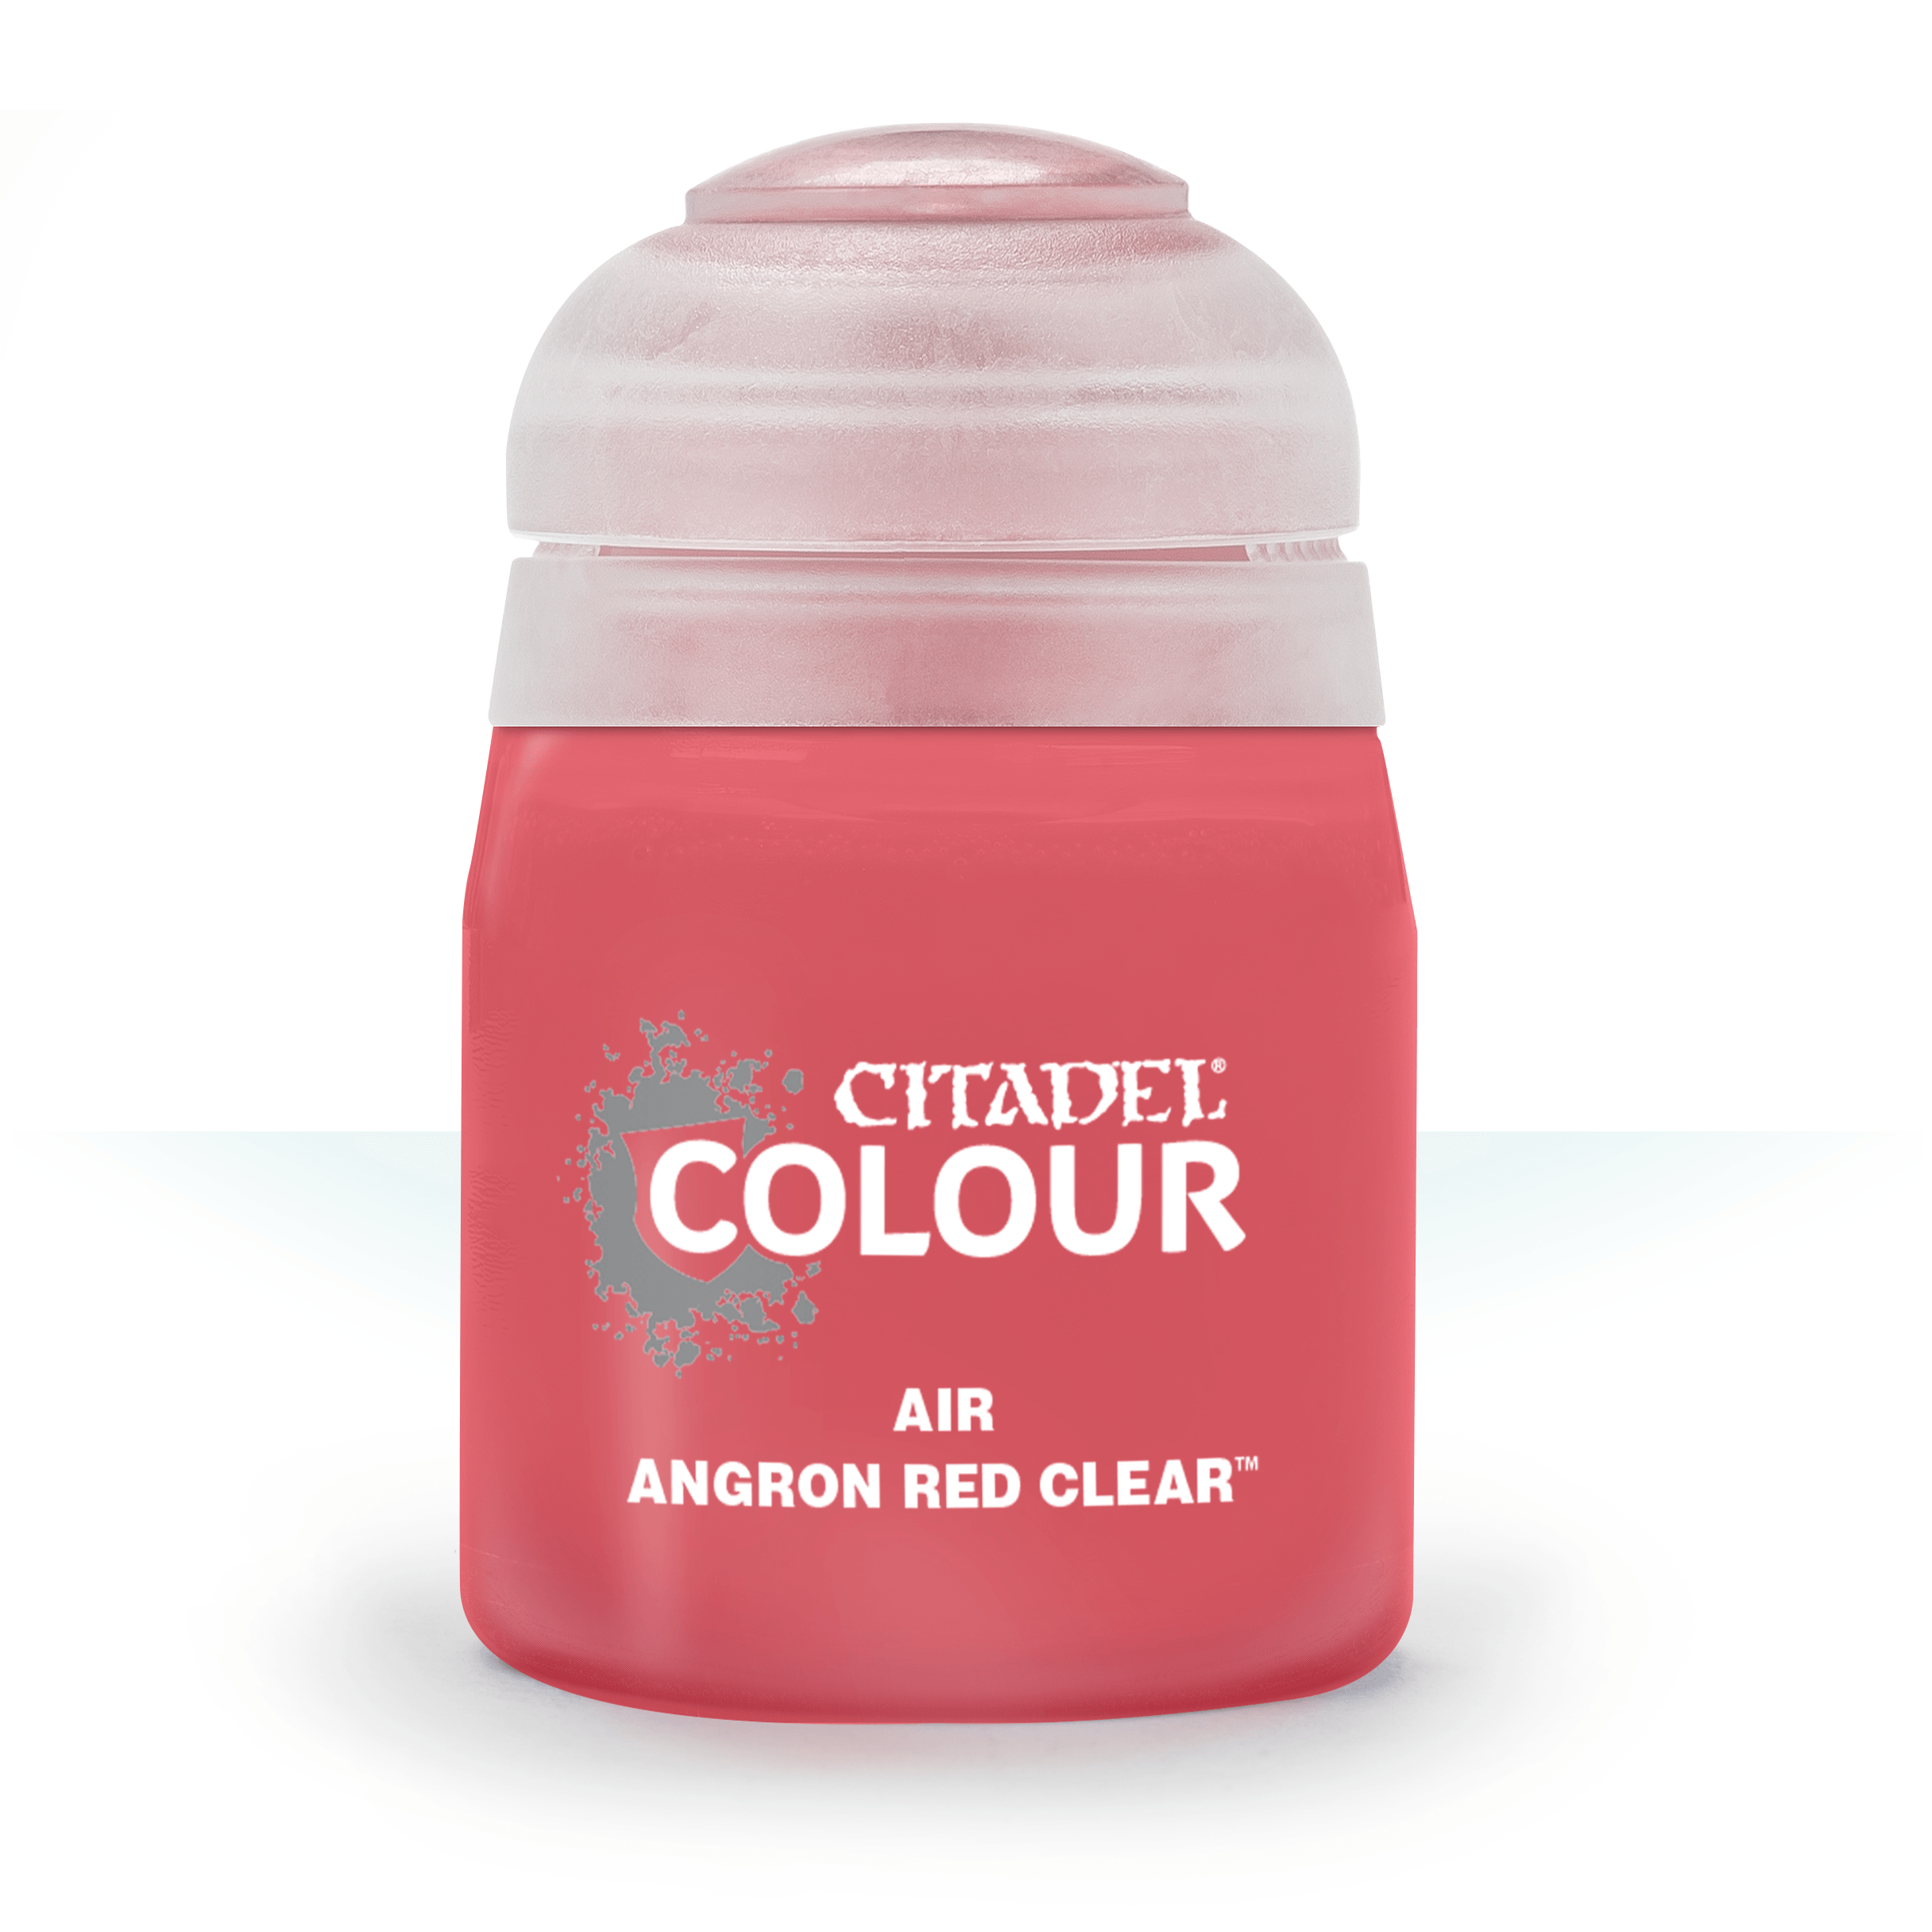 Citadel Air Angron Red Clear